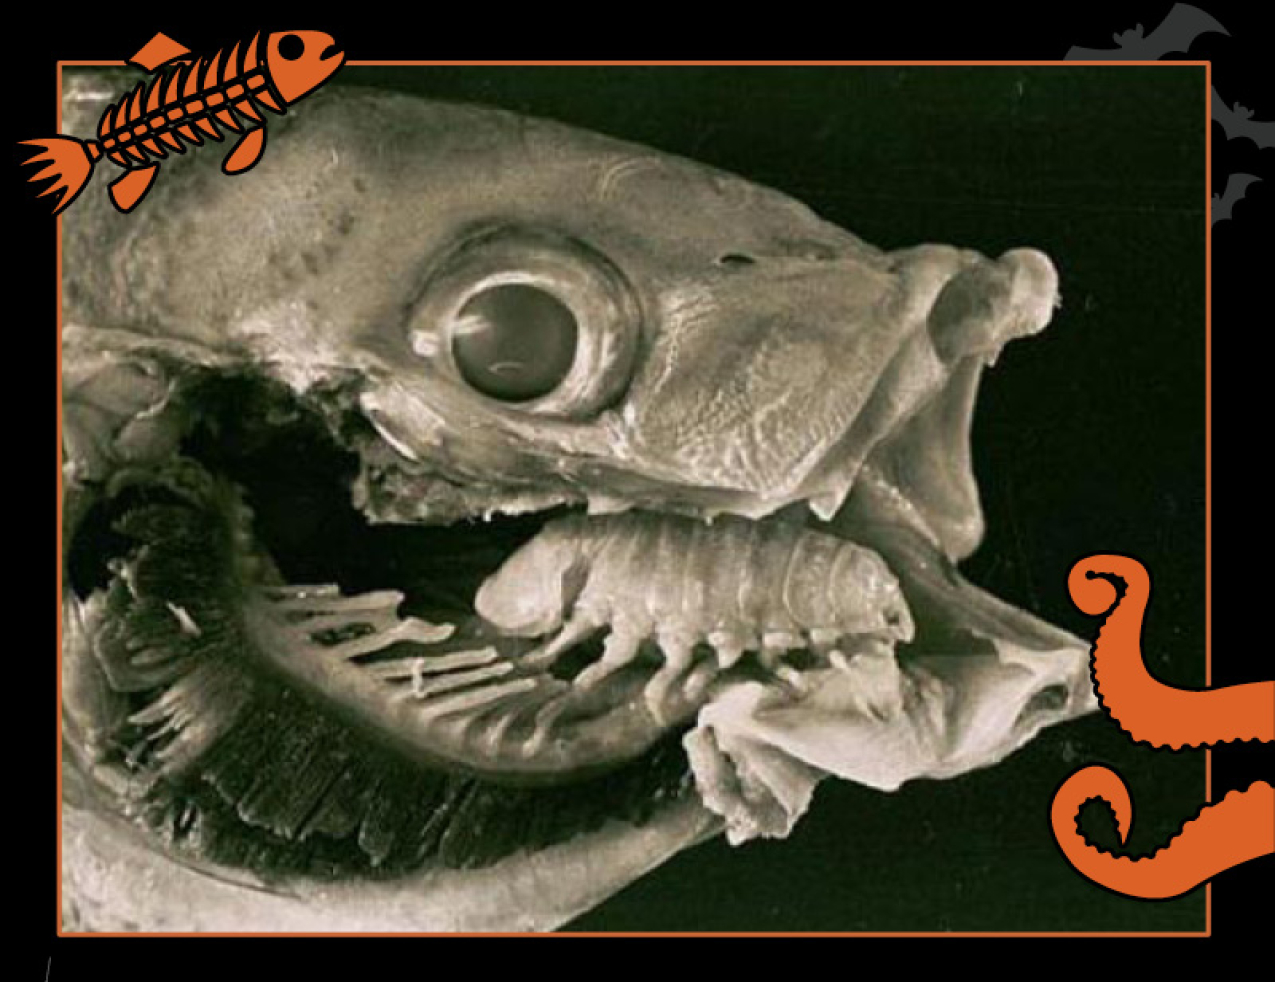 A fish with a parasitic isopod inside its mouth. Border of the photo is black with orange sea creature graphics of octopus tentacles and a fish skeleton. Text: Attack of the parasitic isopods, #NOAASpookyScience with NOAA logo.